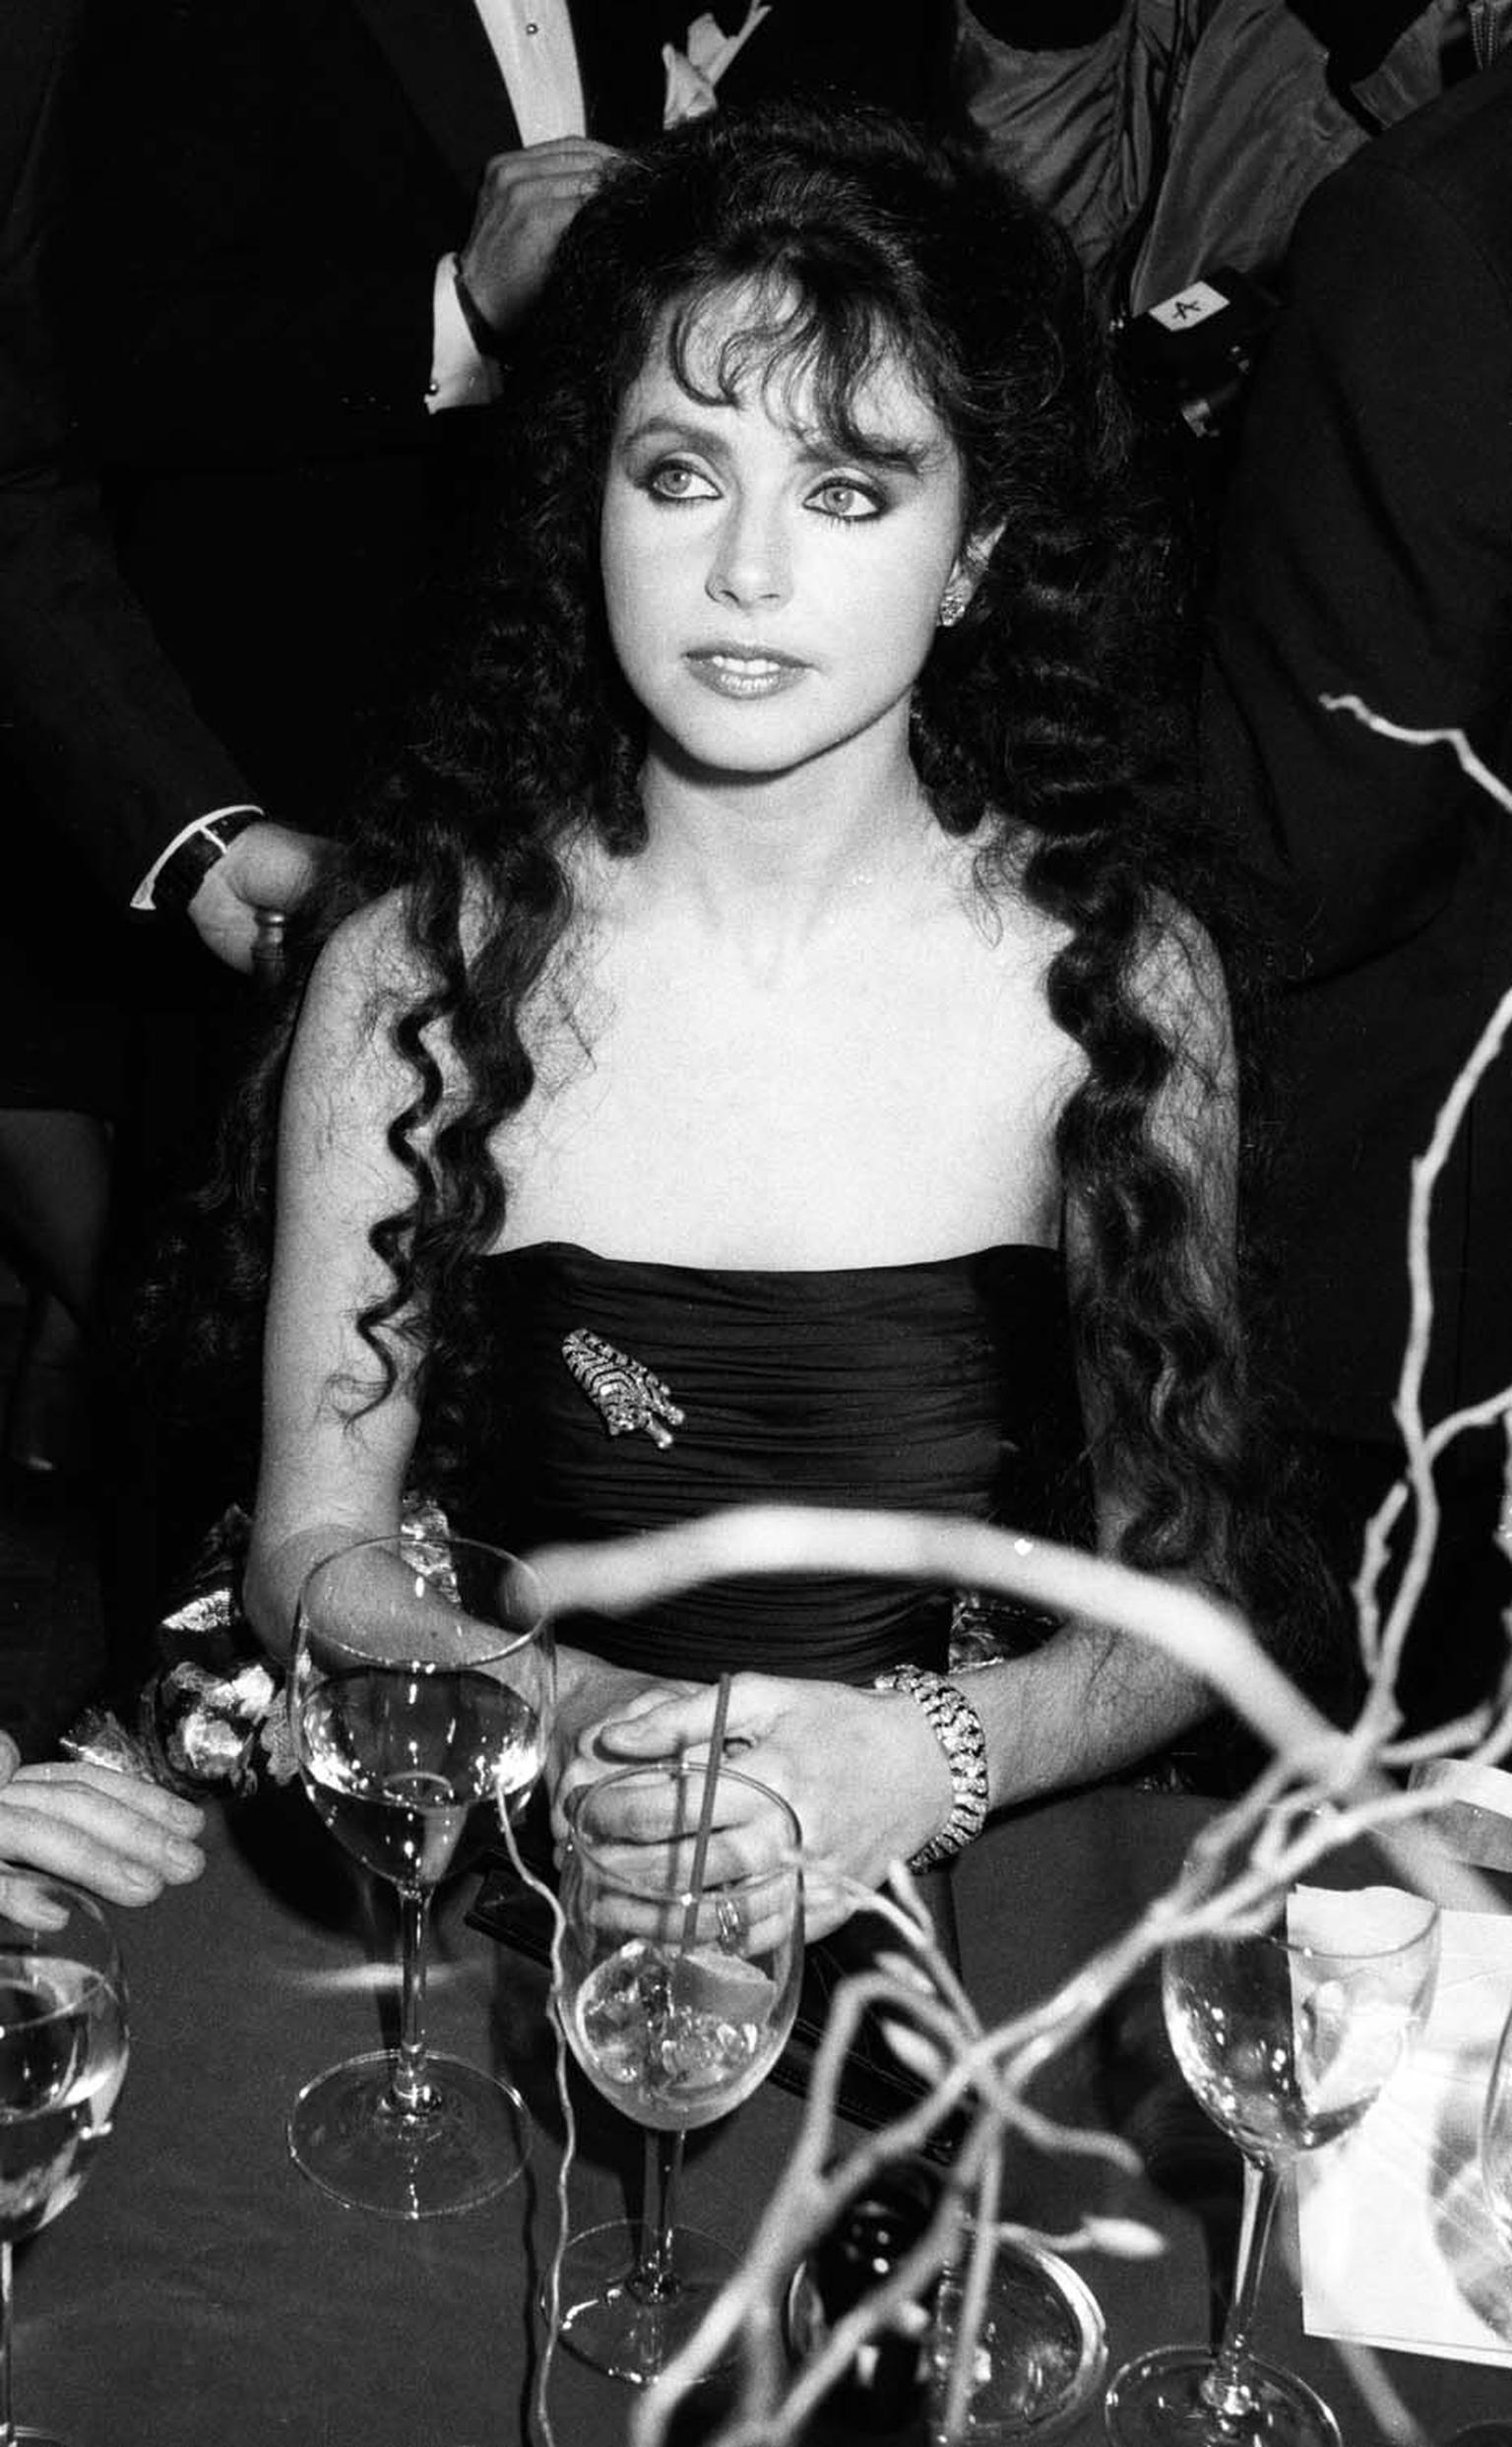 Sarah Brightman wearing the Cartier Tiger brooch at The Phantom of the Opera opening party in New York's Beacon Theatre in 1988. ©Getty Images/Wire Image.